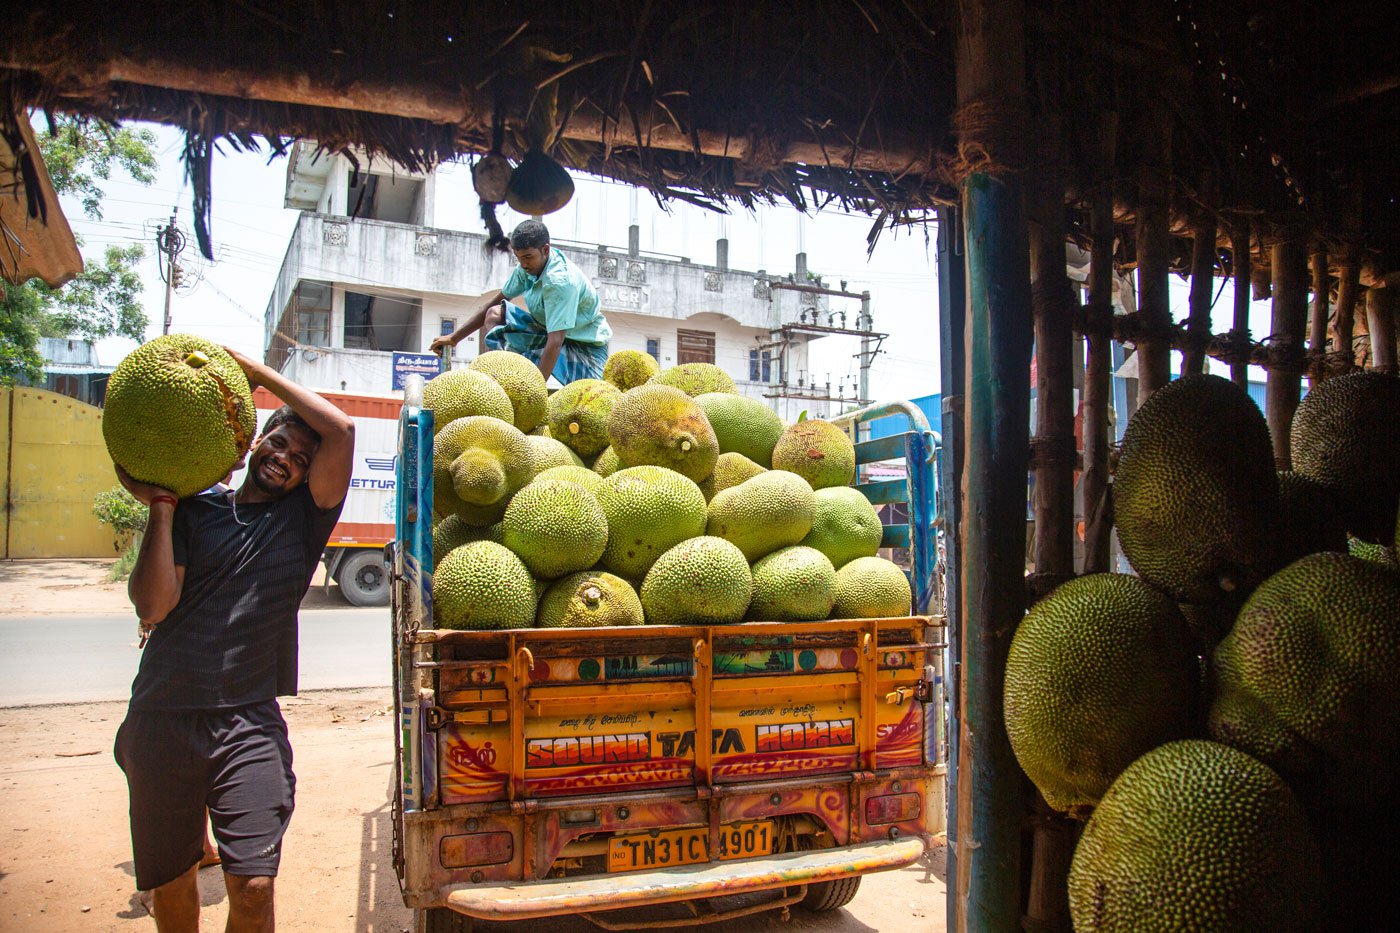 Jackfruit trading involves uncertainties. Even if the harvest is big, some fruits will rot, crack open, fall down and even get eaten by  animals